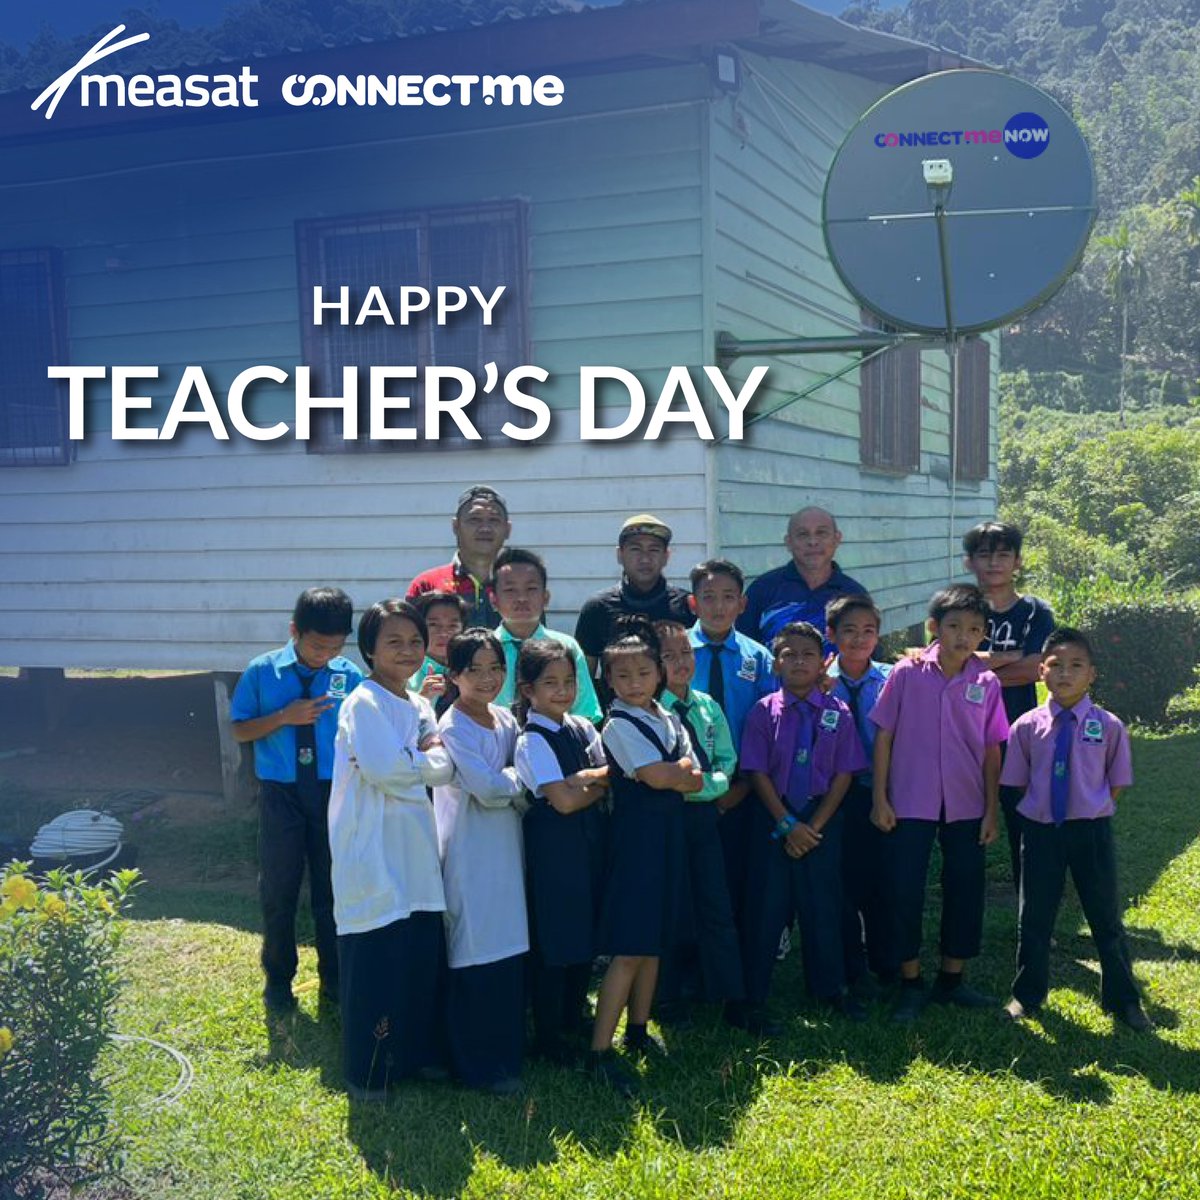 Happy Teacher's Day to all educators who transform lives in countless ways, including through digital education, inspiring and nurturing the next generation of thinkers and innovators

#MEASAT #CONNECTme